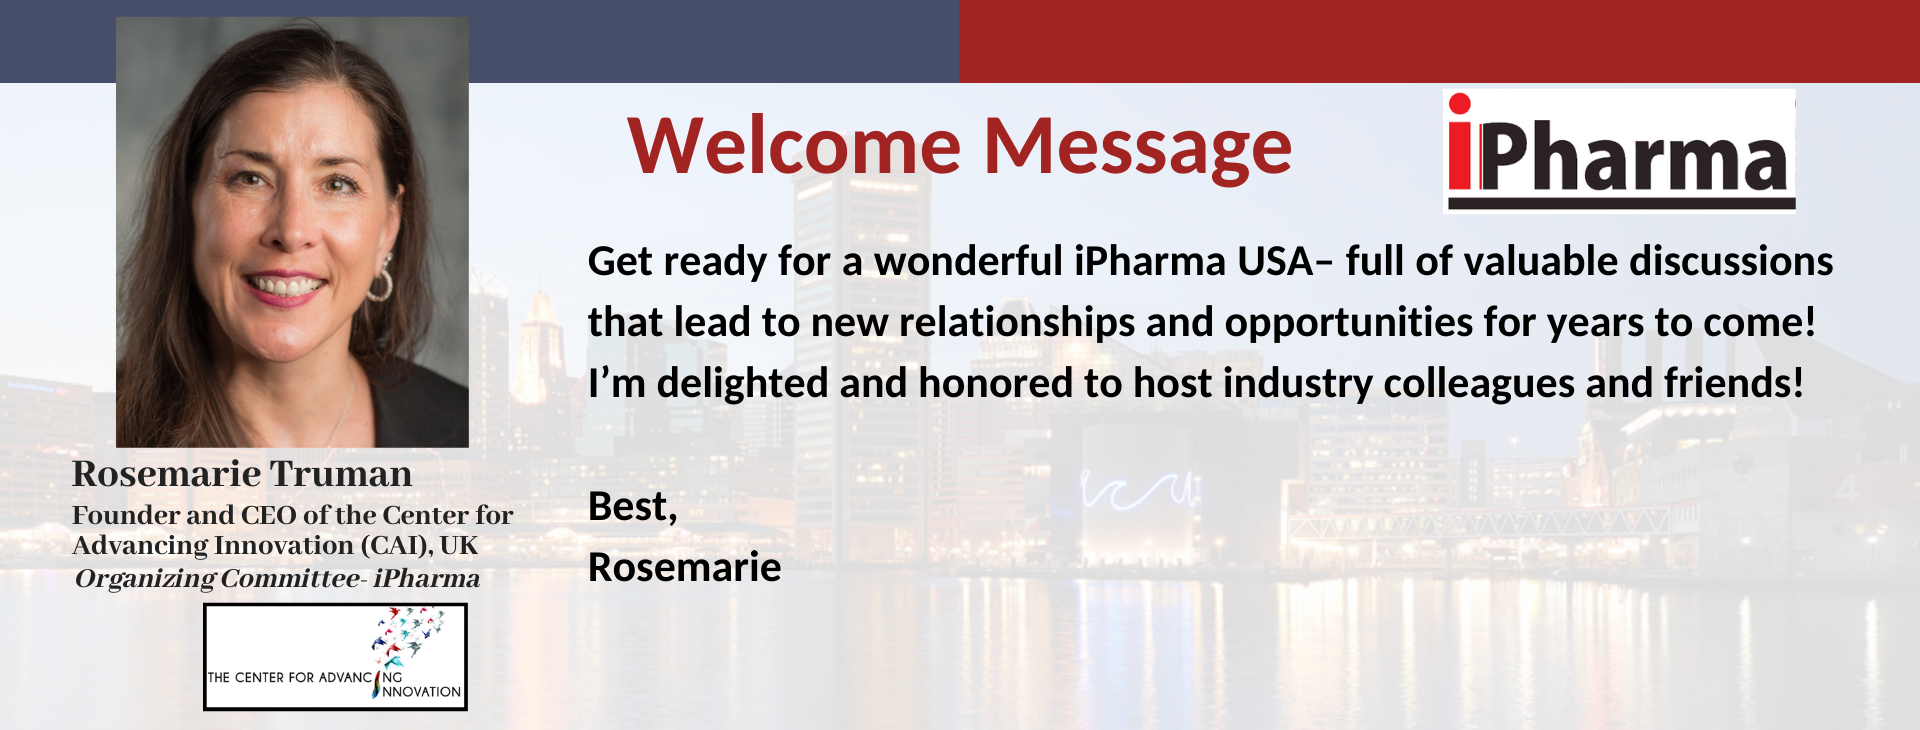 iPharma Conference Welcome Message